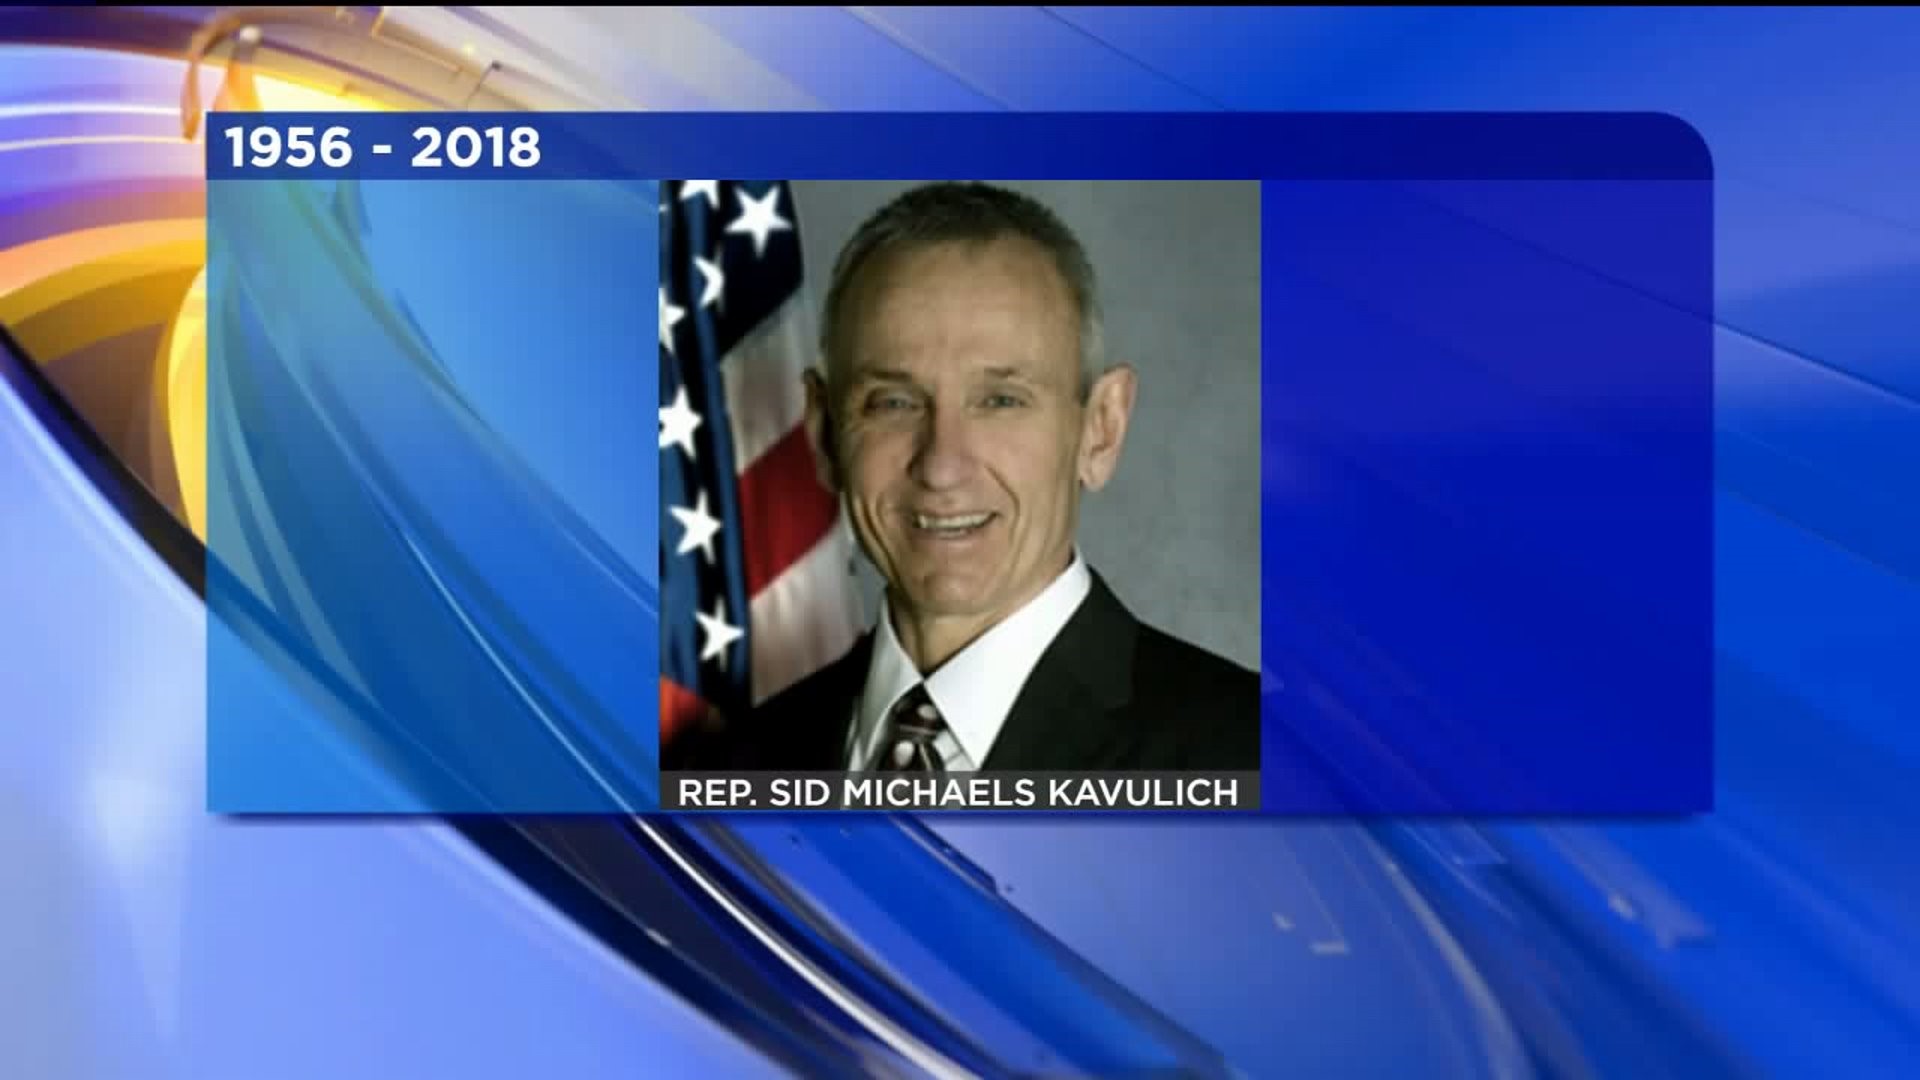 Hundreds Attend Viewing for Rep. Sid Michaels Kavulich